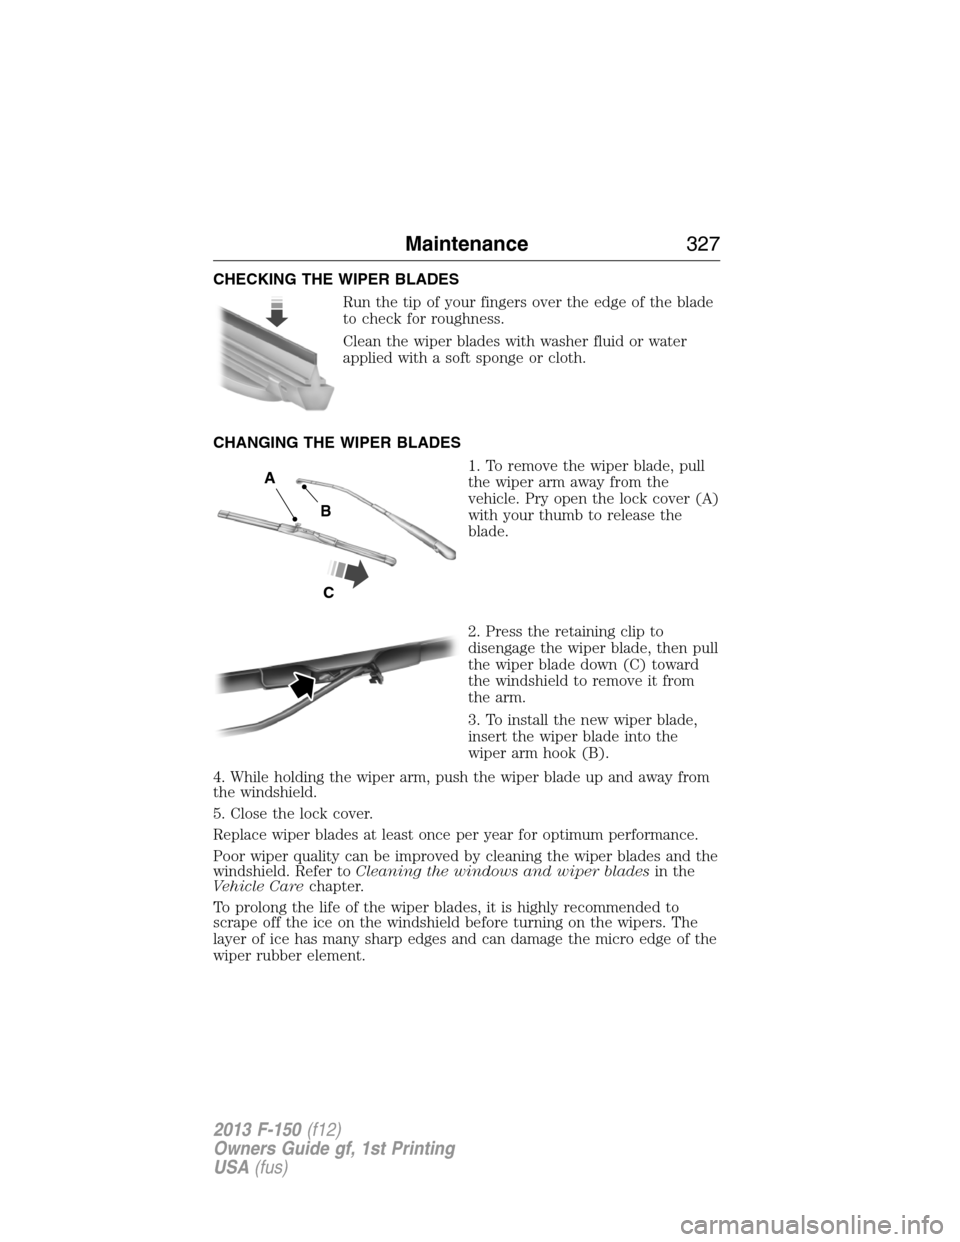 FORD F150 2013 12.G Owners Manual CHECKING THE WIPER BLADES
Run the tip of your fingers over the edge of the blade
to check for roughness.
Clean the wiper blades with washer fluid or water
applied with a soft sponge or cloth.
CHANGING